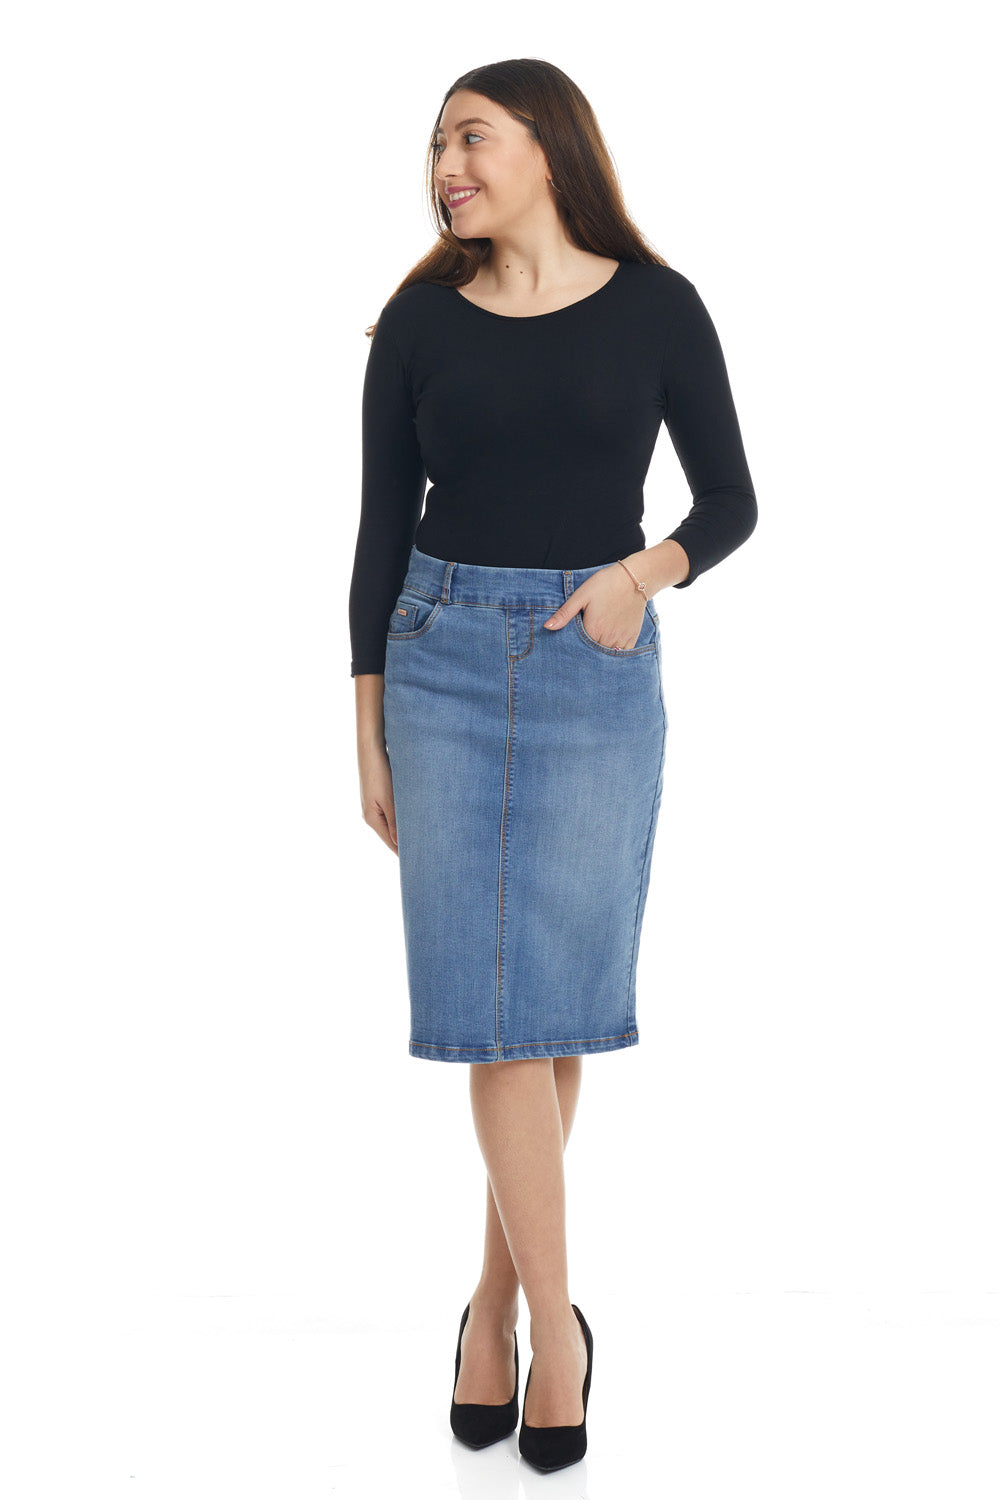 classic blue below knee length straight jean skirt with front and back pockets